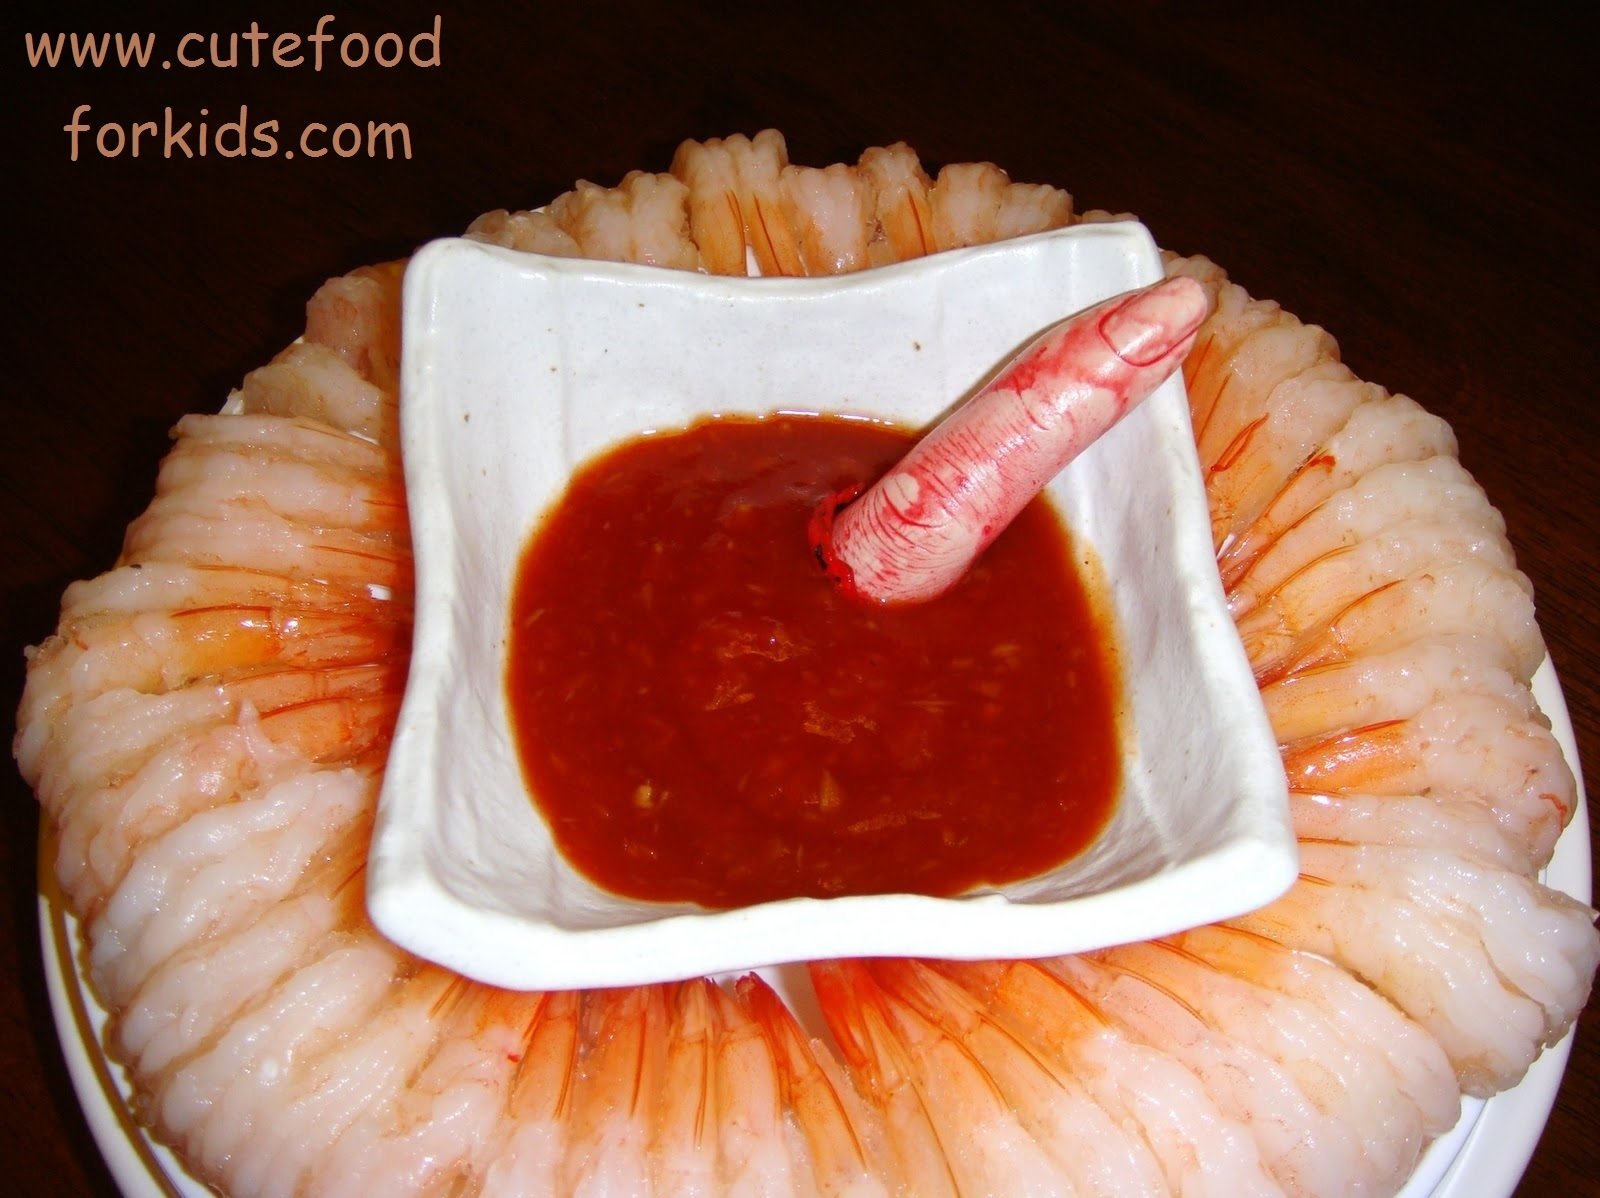 10 Unique Halloween Food Ideas For Adults Easy cute food for kids 27 halloween finger food ideas 1 2022